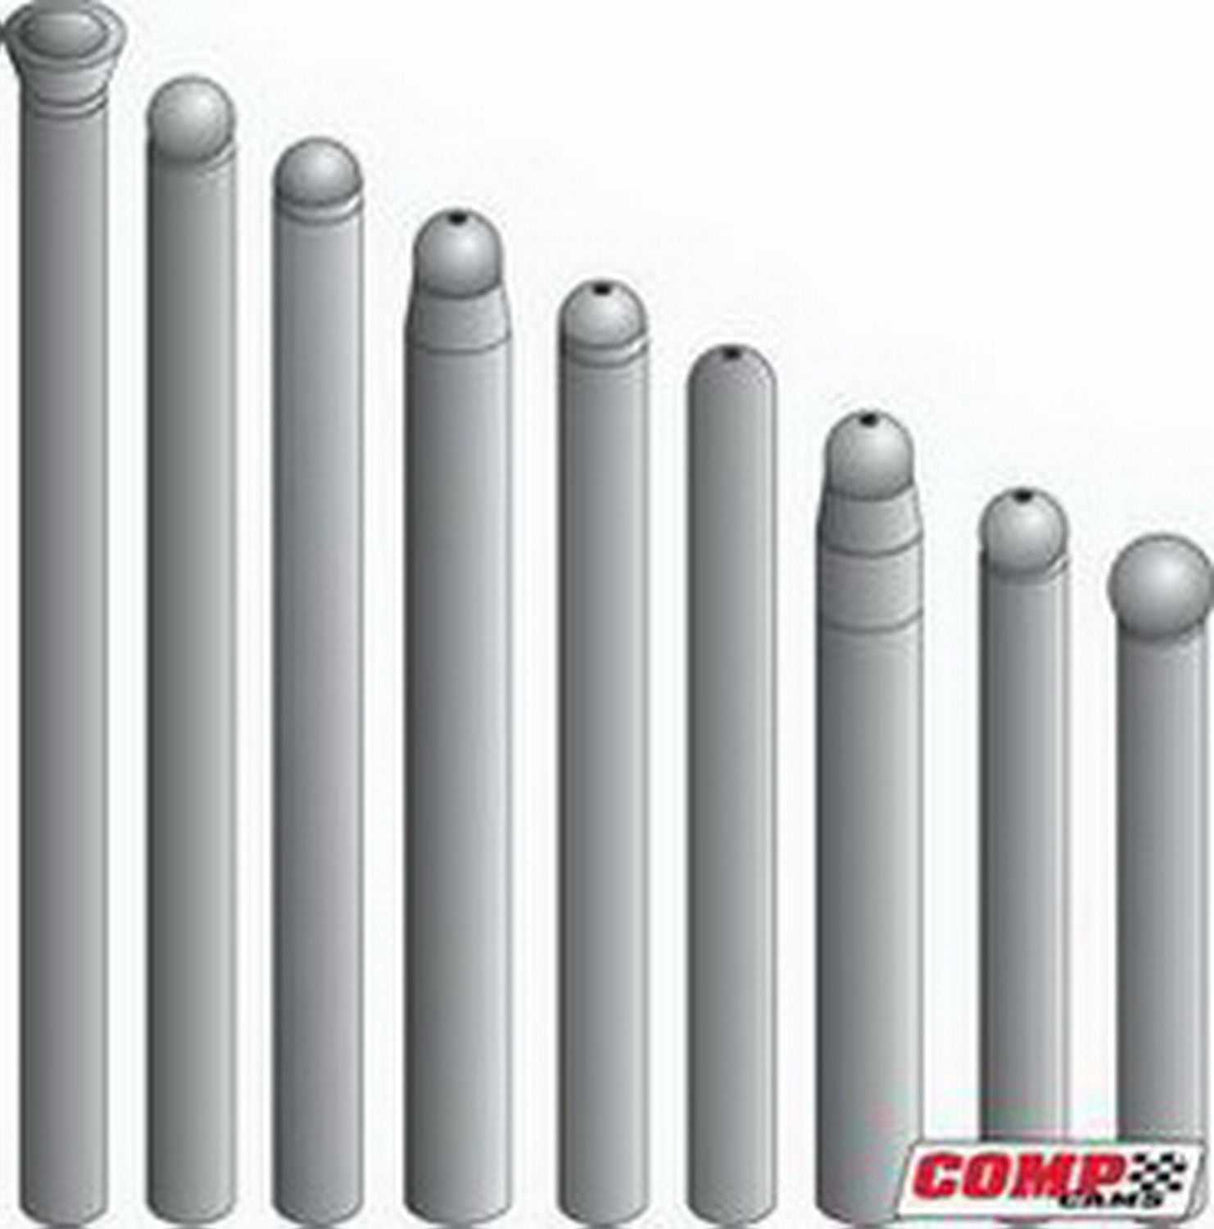 7823-16 Competition Cams Engine Pushrod Street Rods/RV/Daily Driver